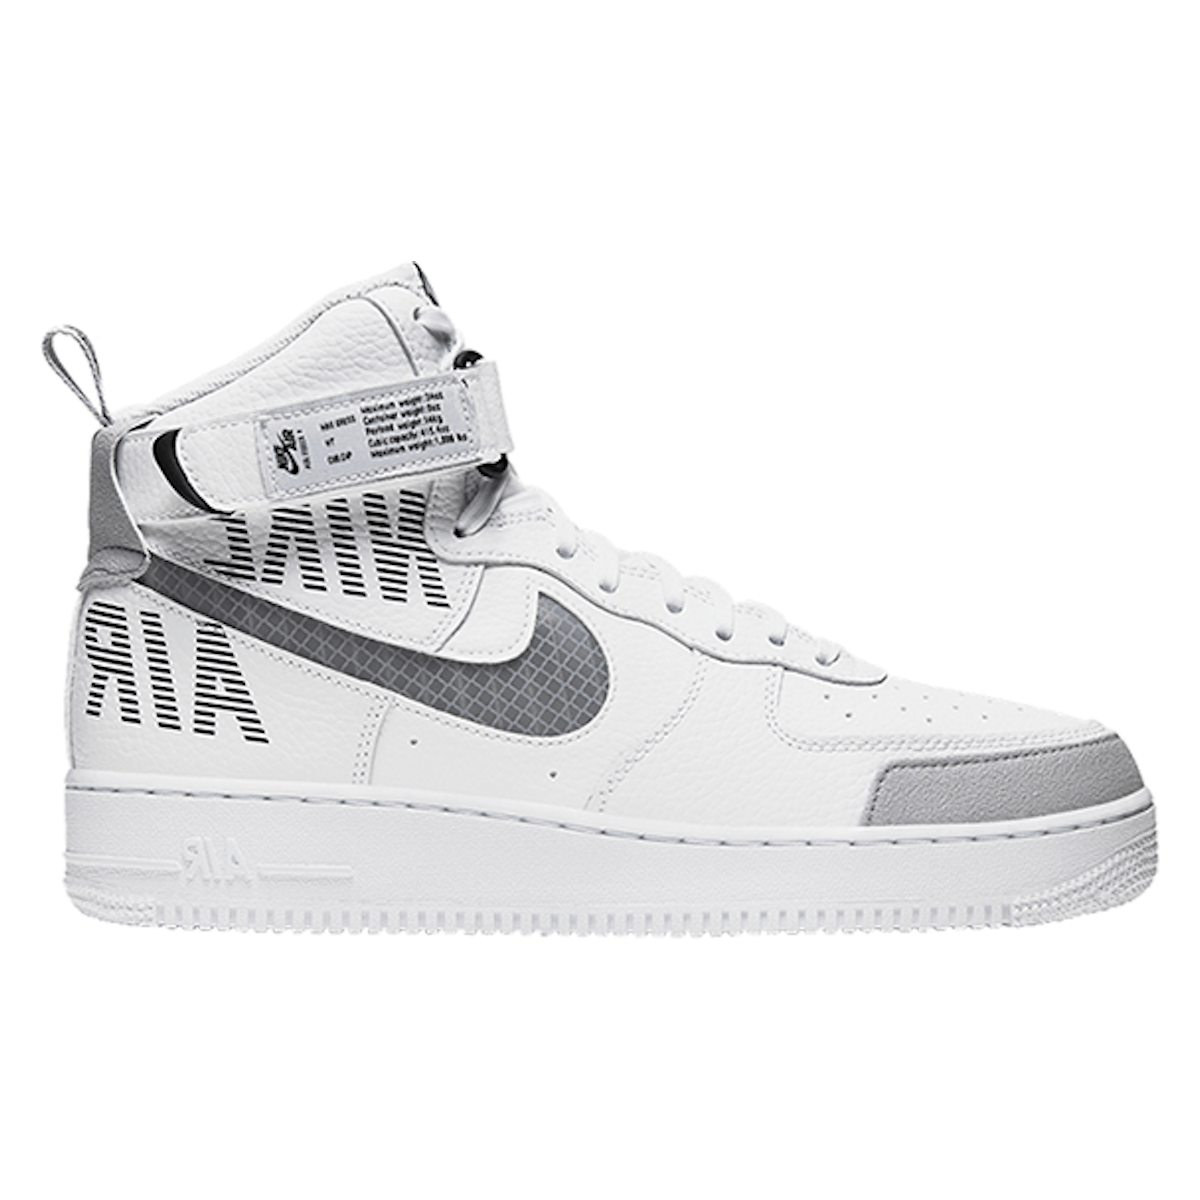 Nike Air Force 1 High "Under Construction - White"